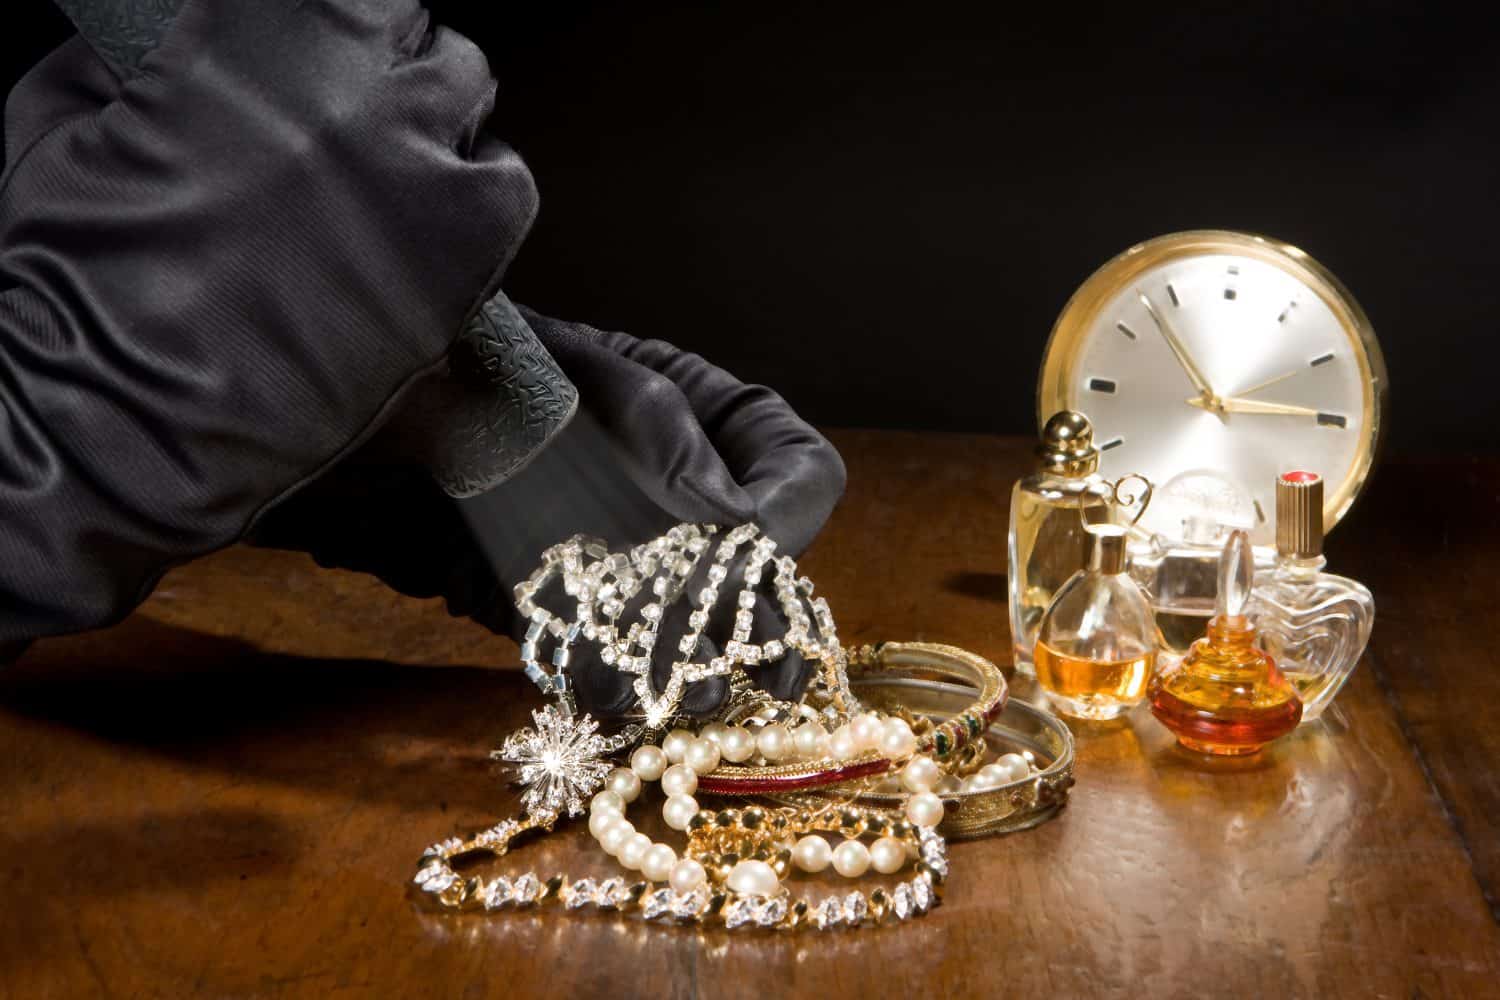 Hands of a jewelry thief with black gloves